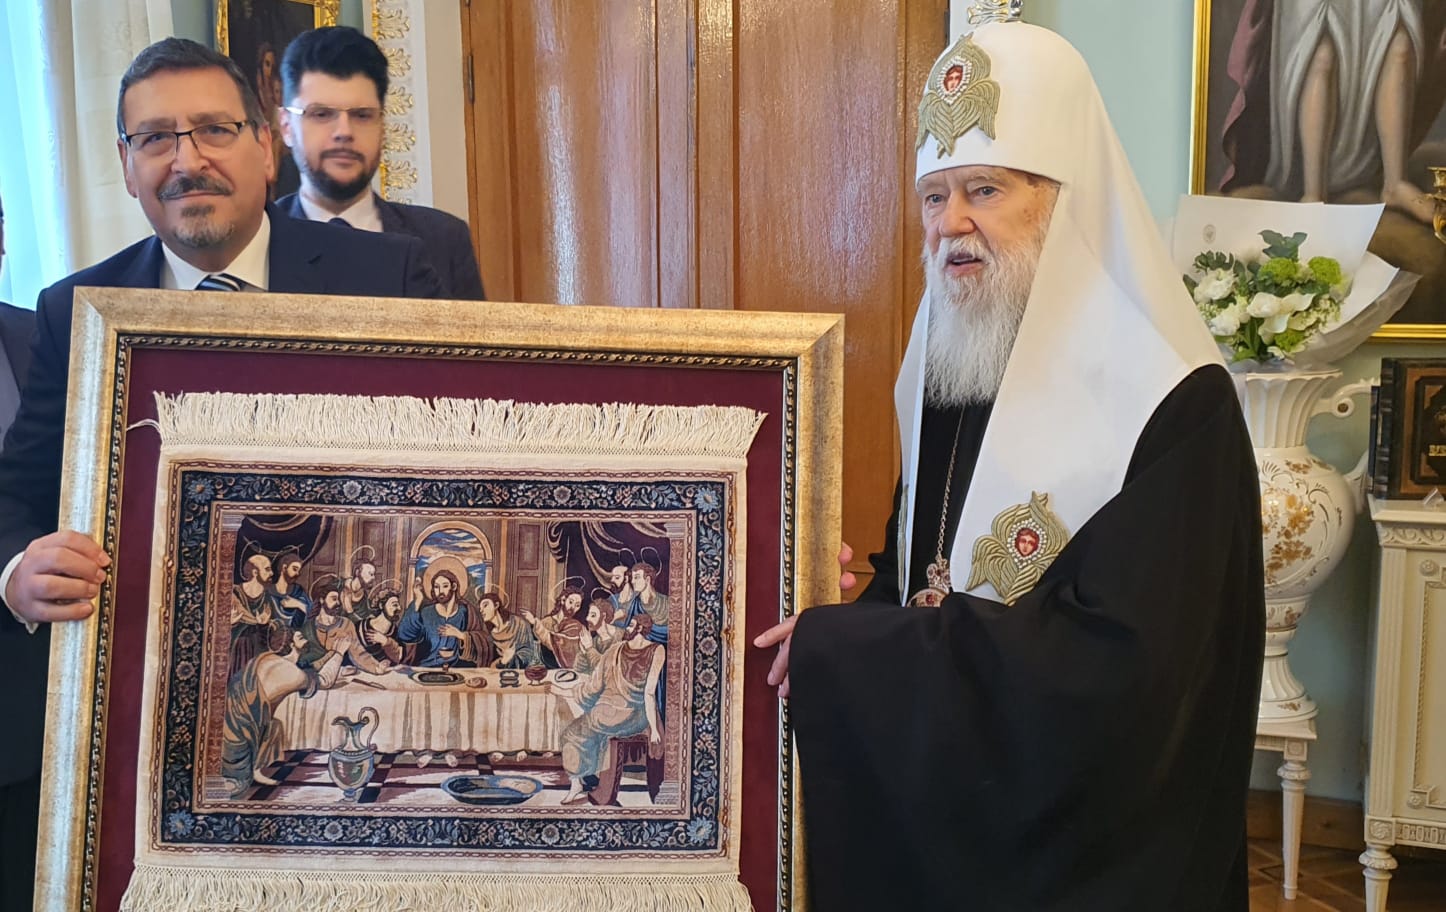 Ambassador Hashem Dajani taking part in the ceremony on the occasion of the 93rd birthday of His Holiness Filaret, The Patriarch of Kyiv And All Rus’-Ukraine